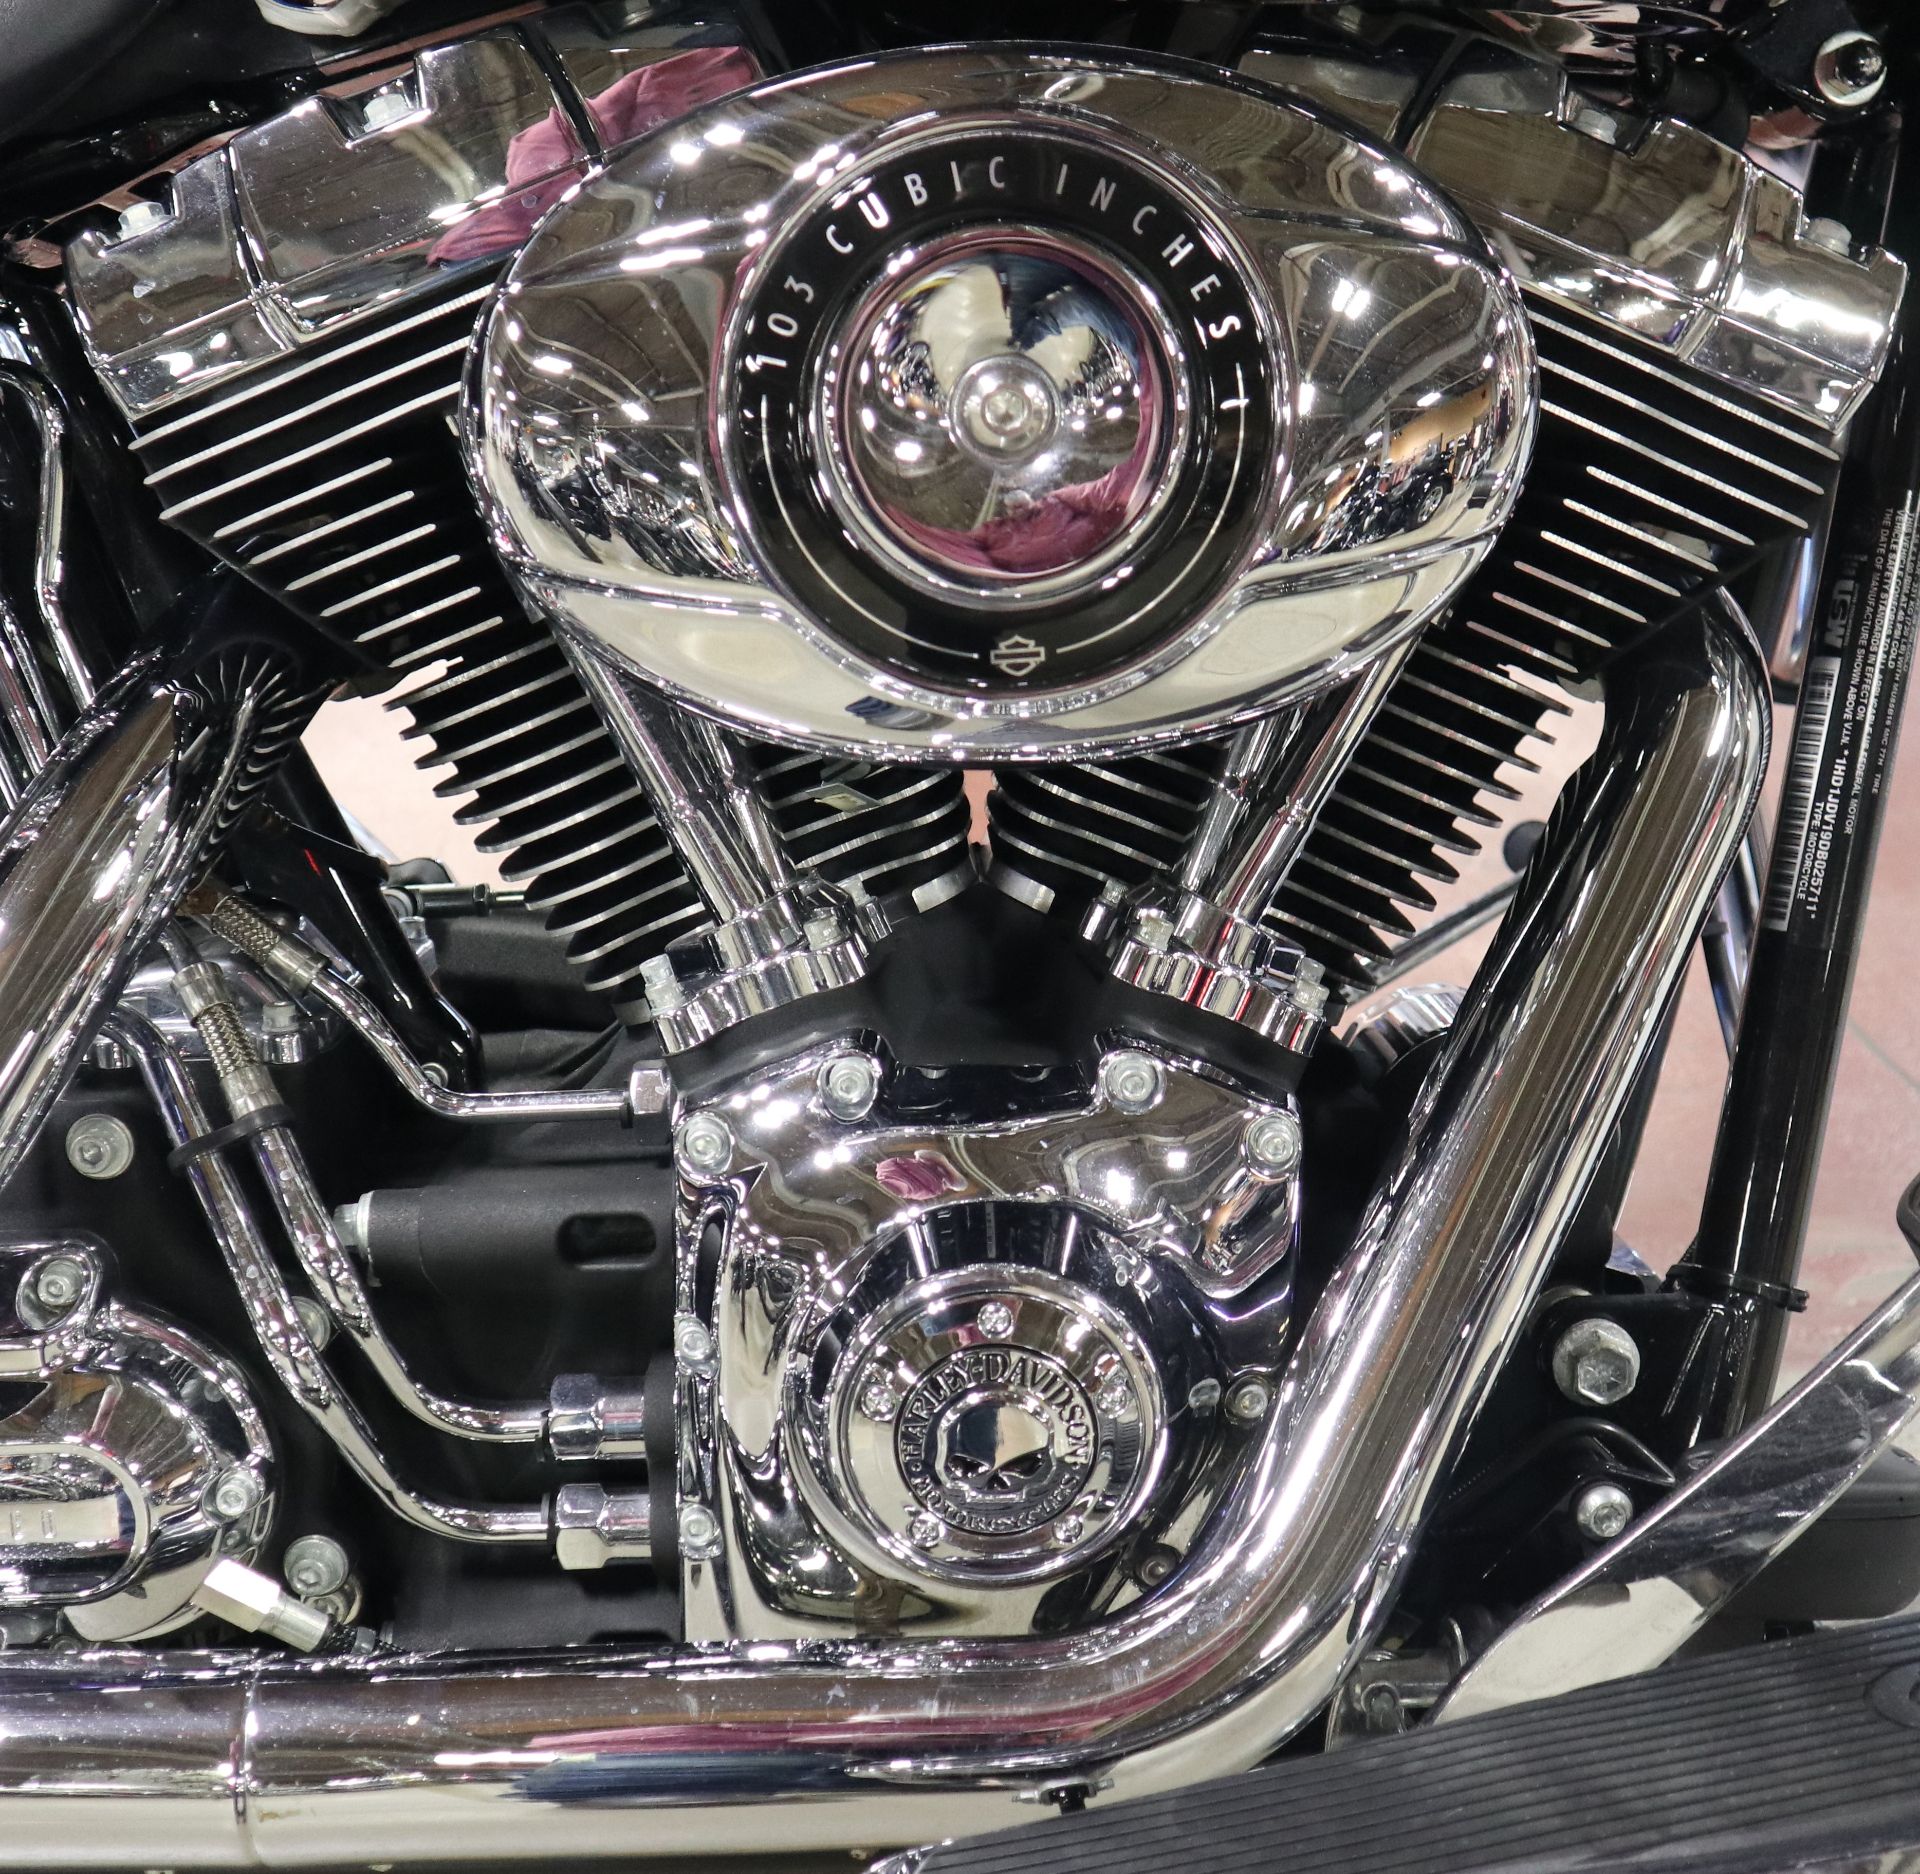 2013 Harley-Davidson Softail® Deluxe in New London, Connecticut - Photo 17